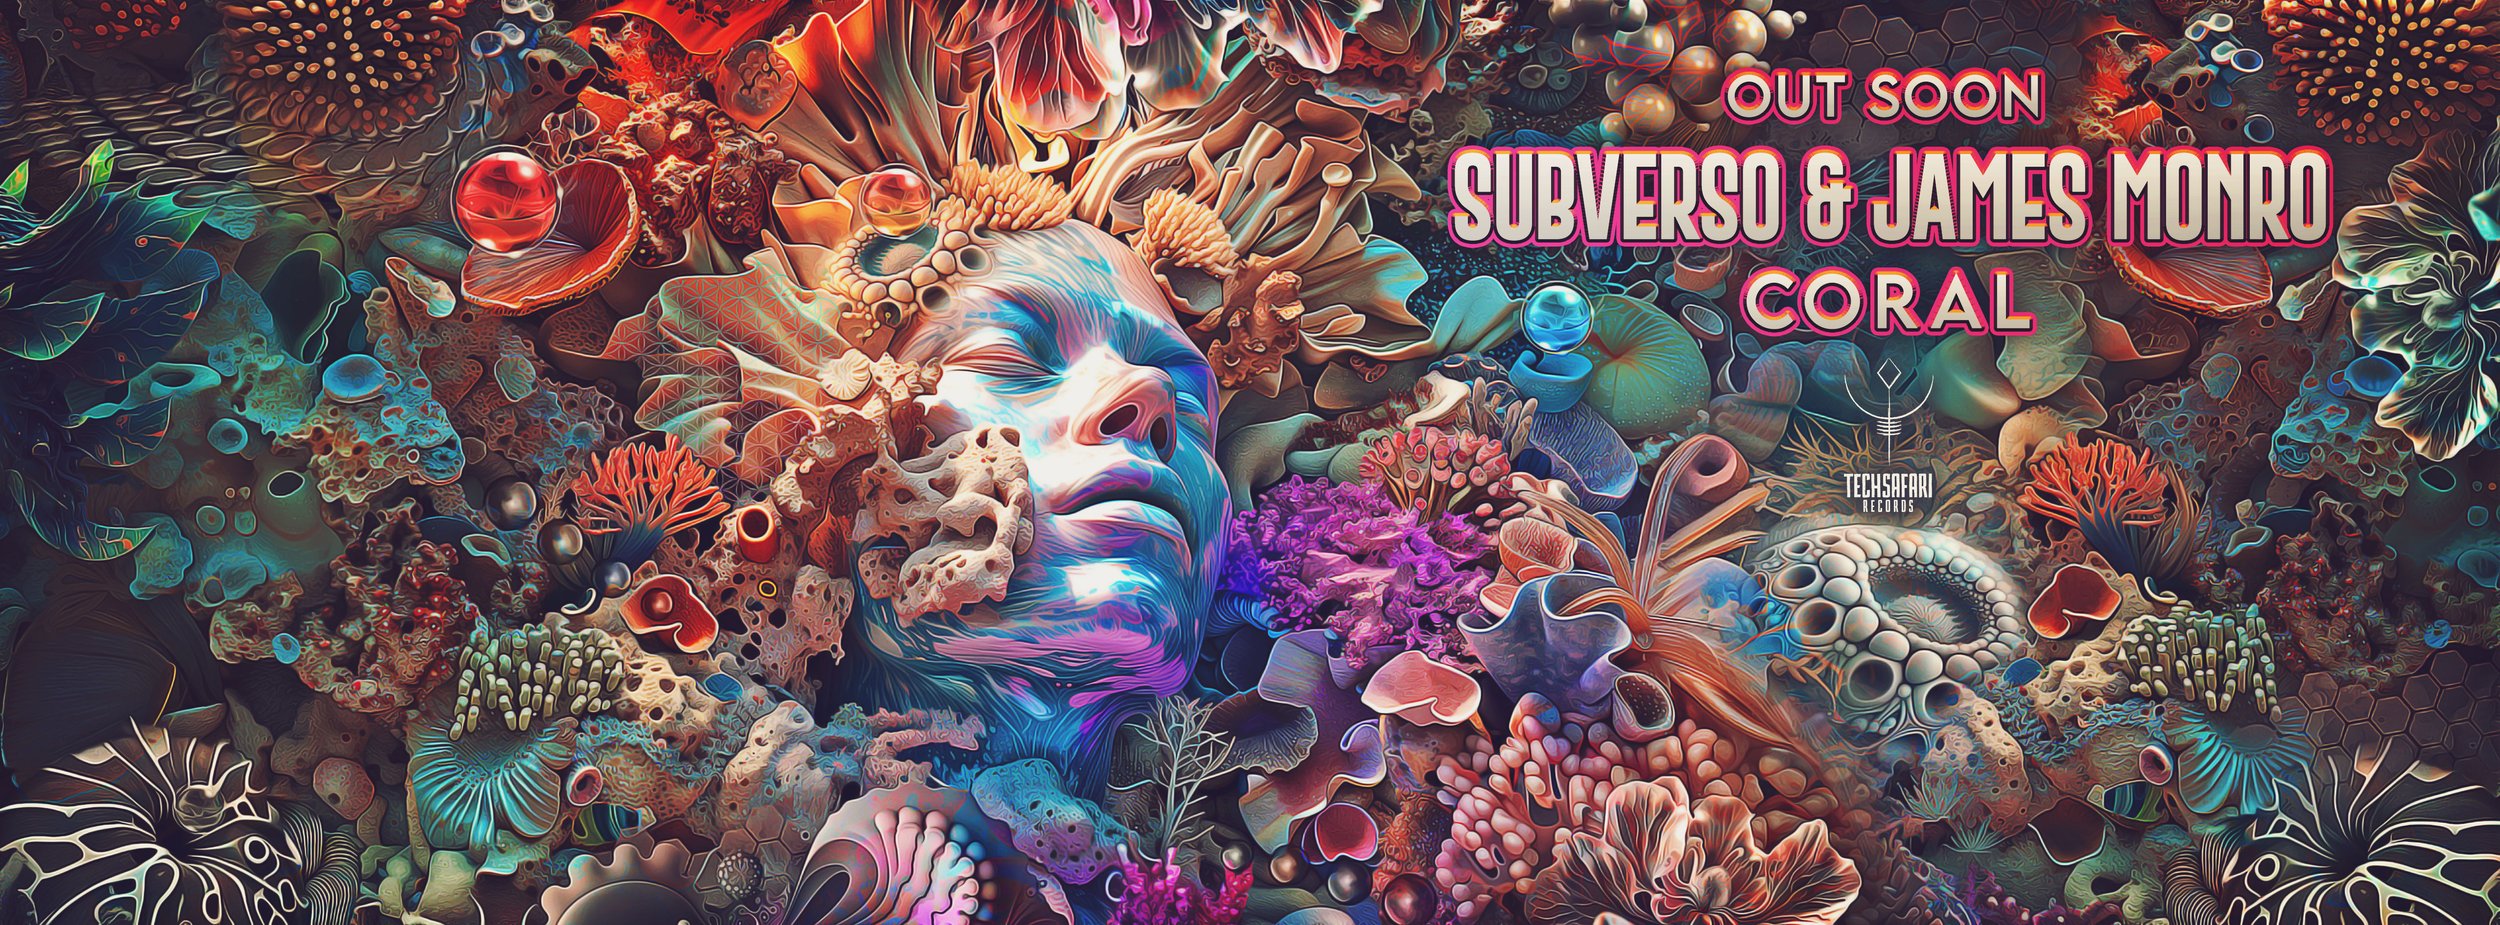 Subverso-&-James-Monro---Coral-v2-banner-out-soon.jpg